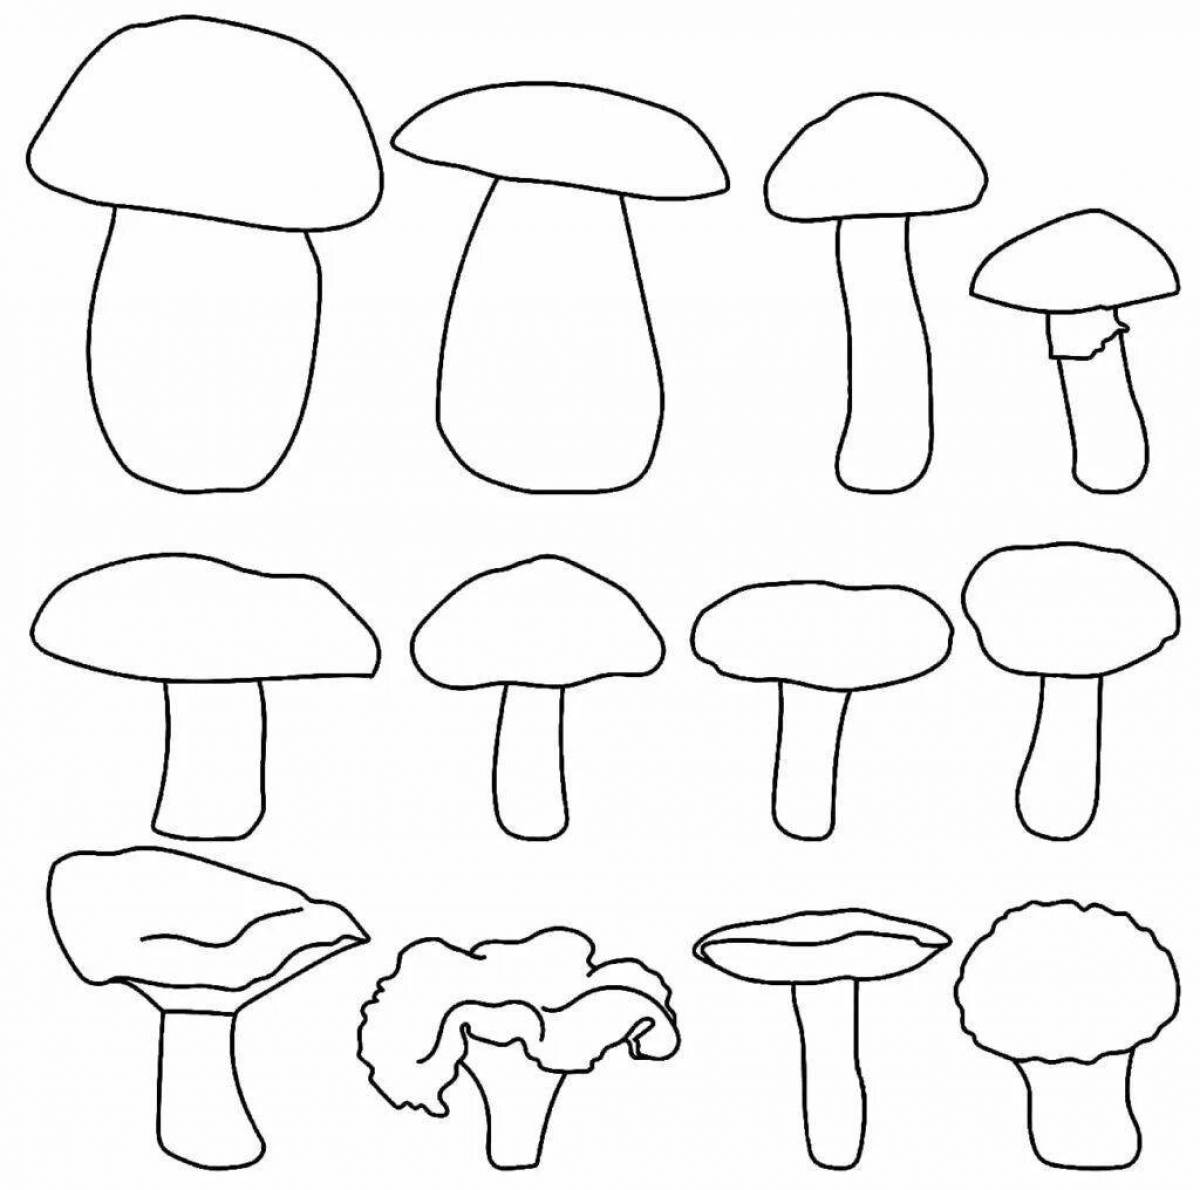 Wonderful fungus coloring book for 3-4 year olds